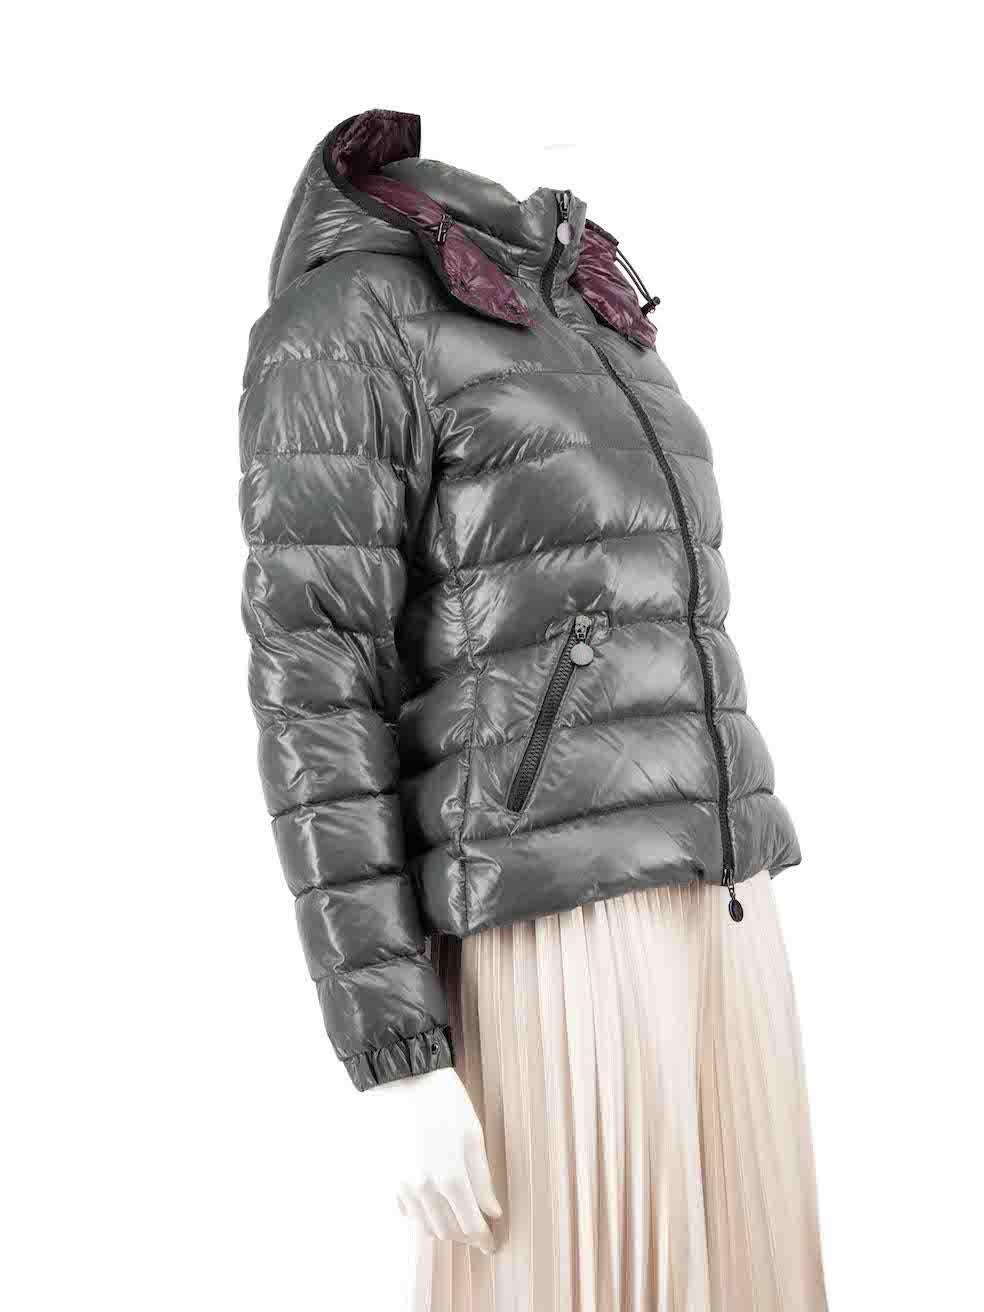 CONDITION is Very good. Minimal wear to coat is evident. Minimal wear to the right sleeve with pilling to the elbow and the left sleeve has a pull to the stitching on this used Moncler designer resale item.
 
 Details
 Grey
 Synthetic
 Puffer coat
